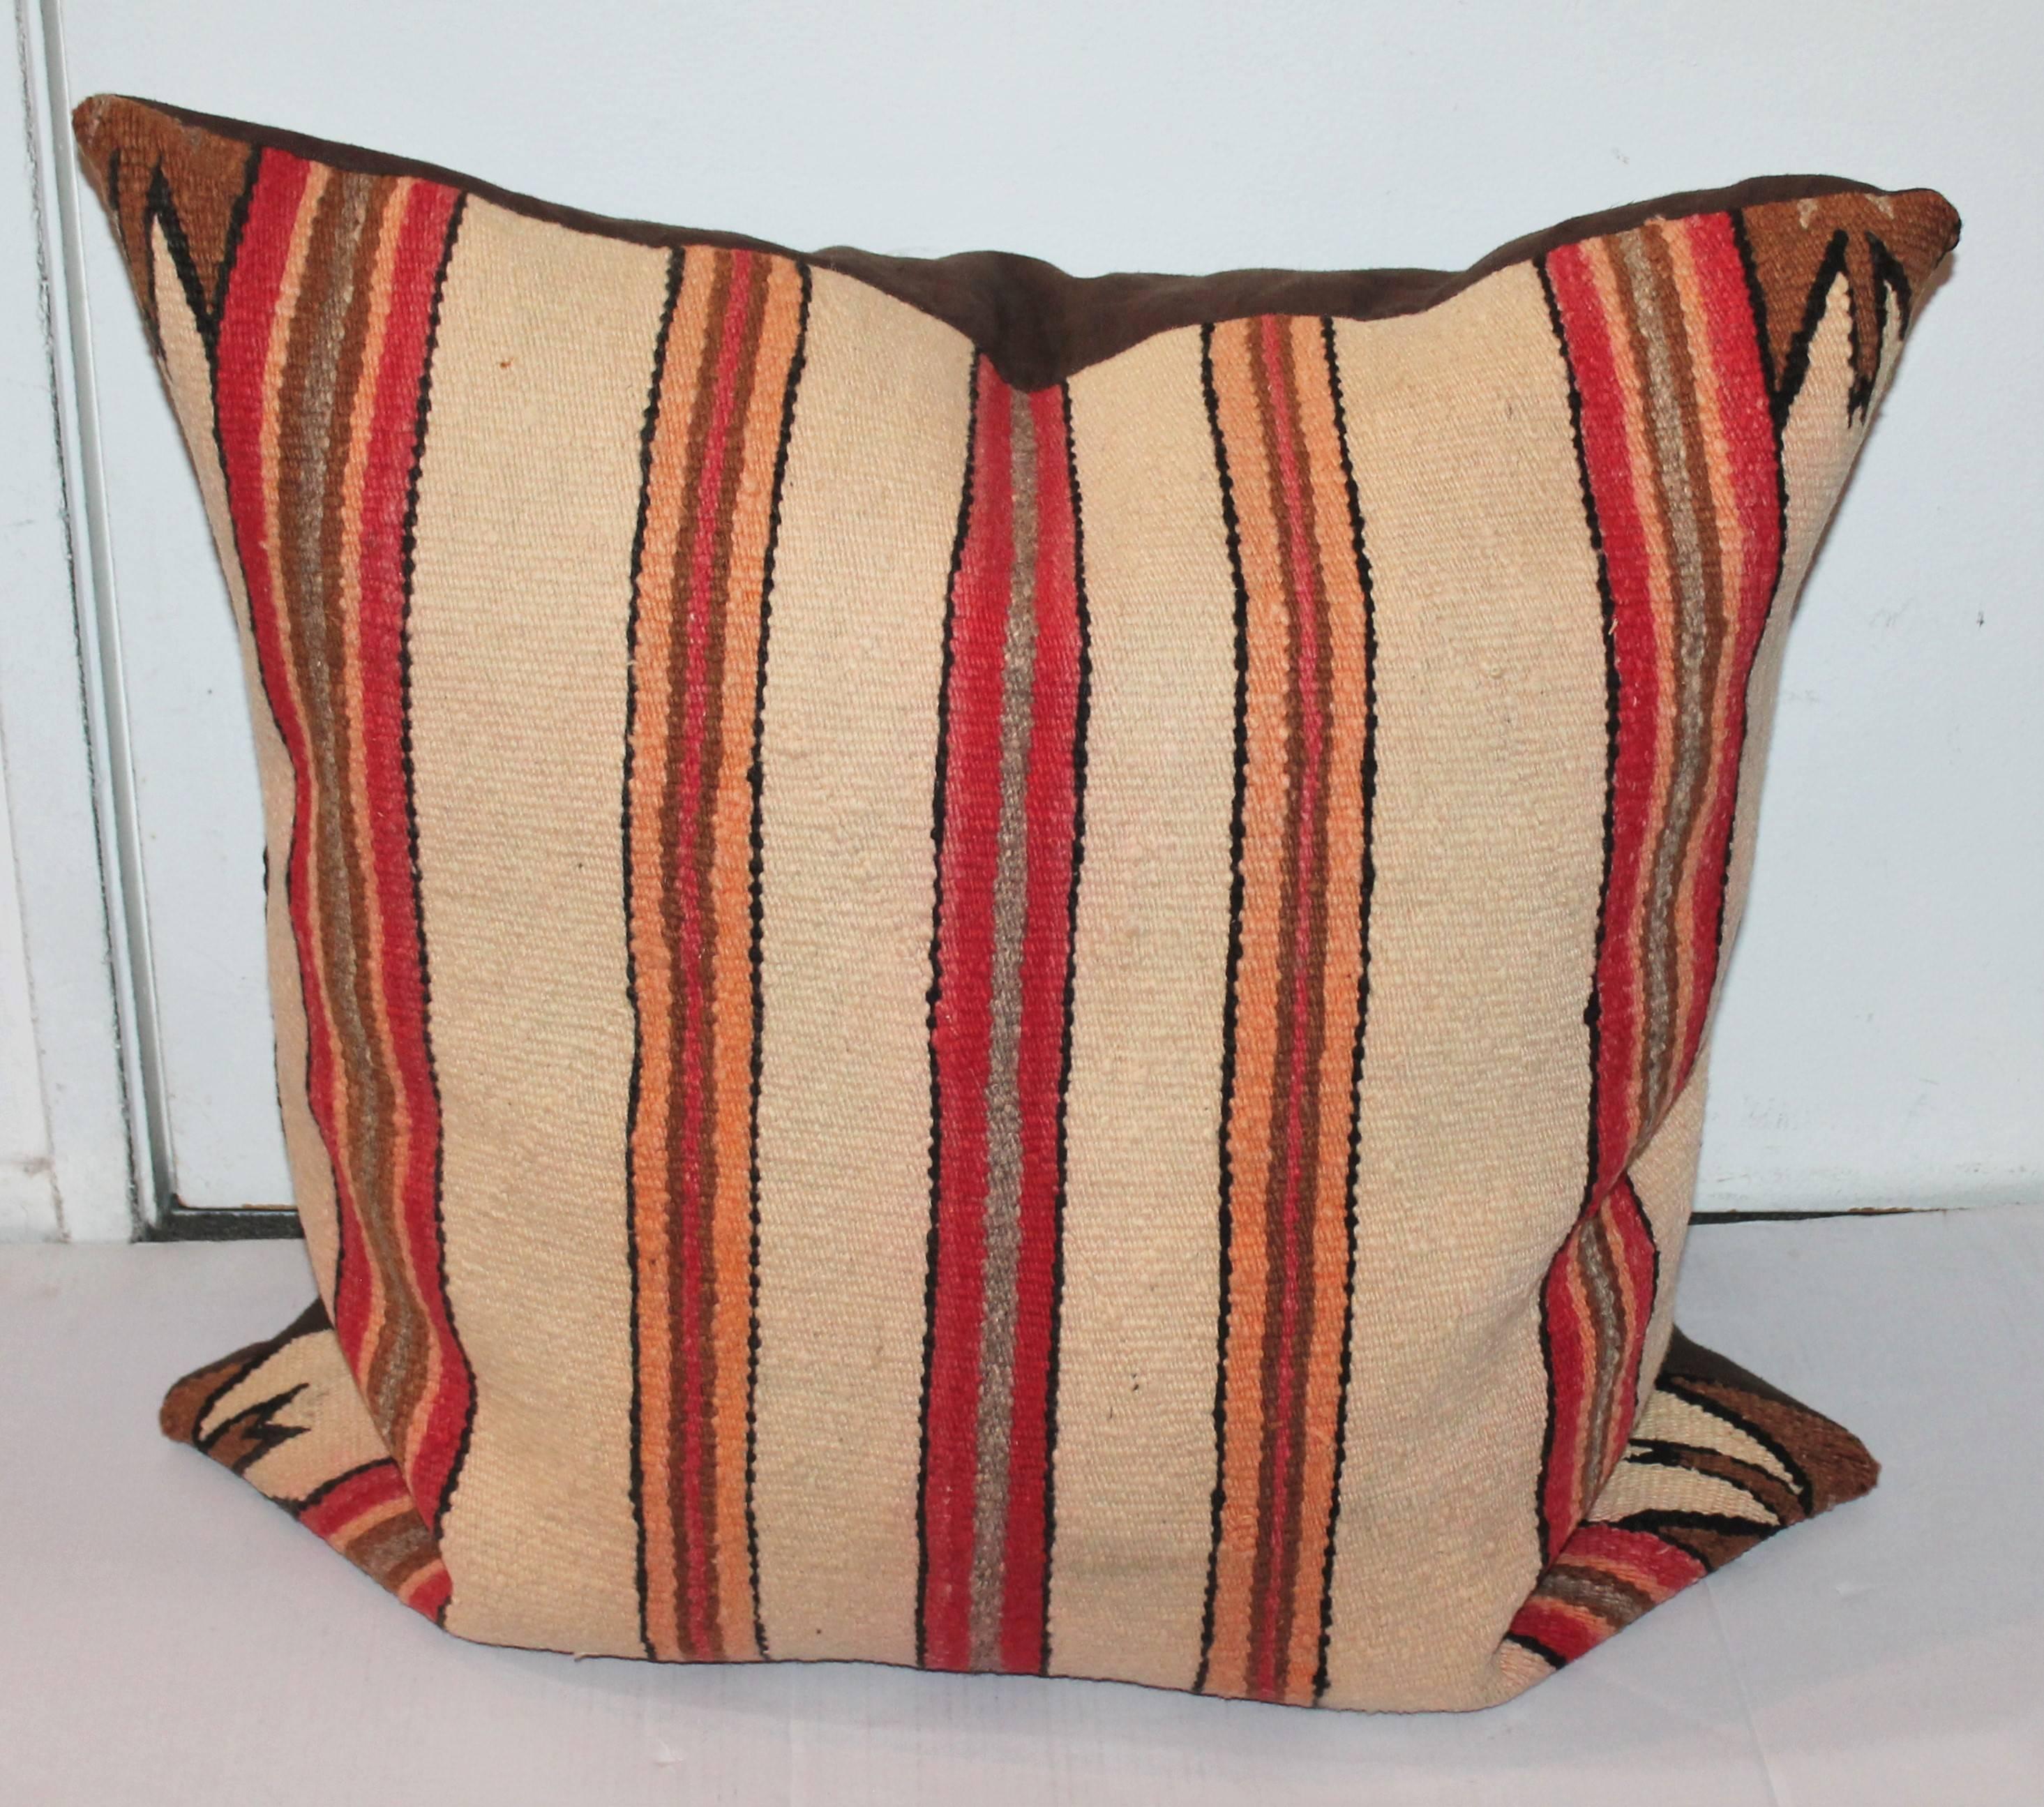 This early striped Navajo weaving bolster pillow has unusual saw tooth pattern in corners. The back is a dark chocolate cotton linen backing. The condition is very good with down and feather fill.